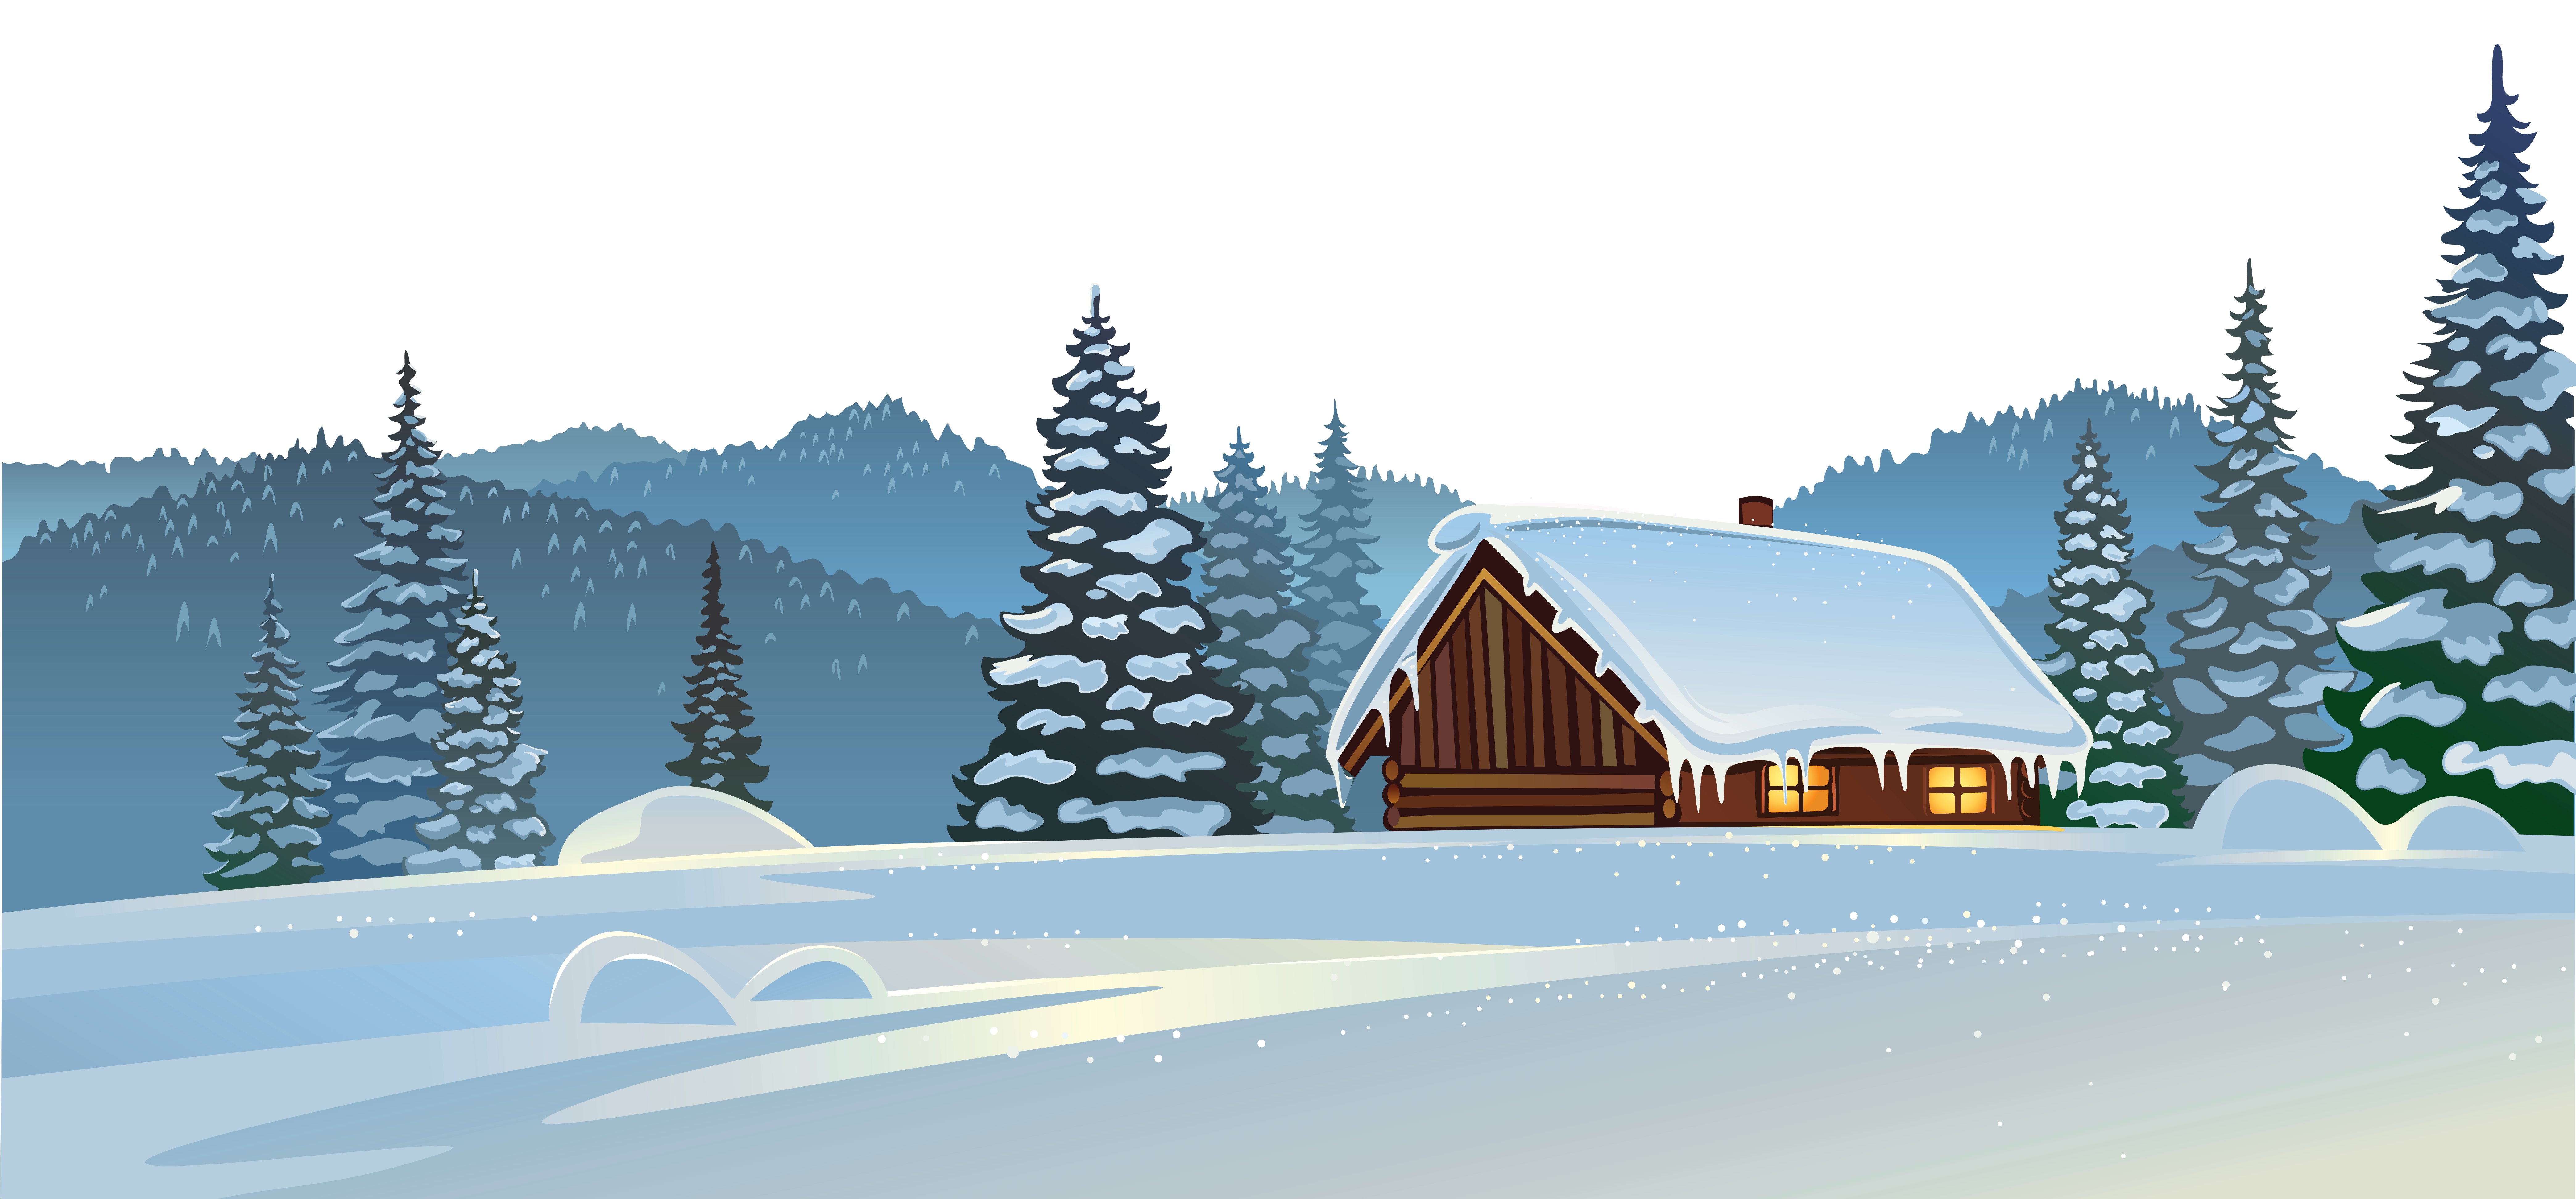 Snow cilpart inspiration house. Beautiful clipart winter